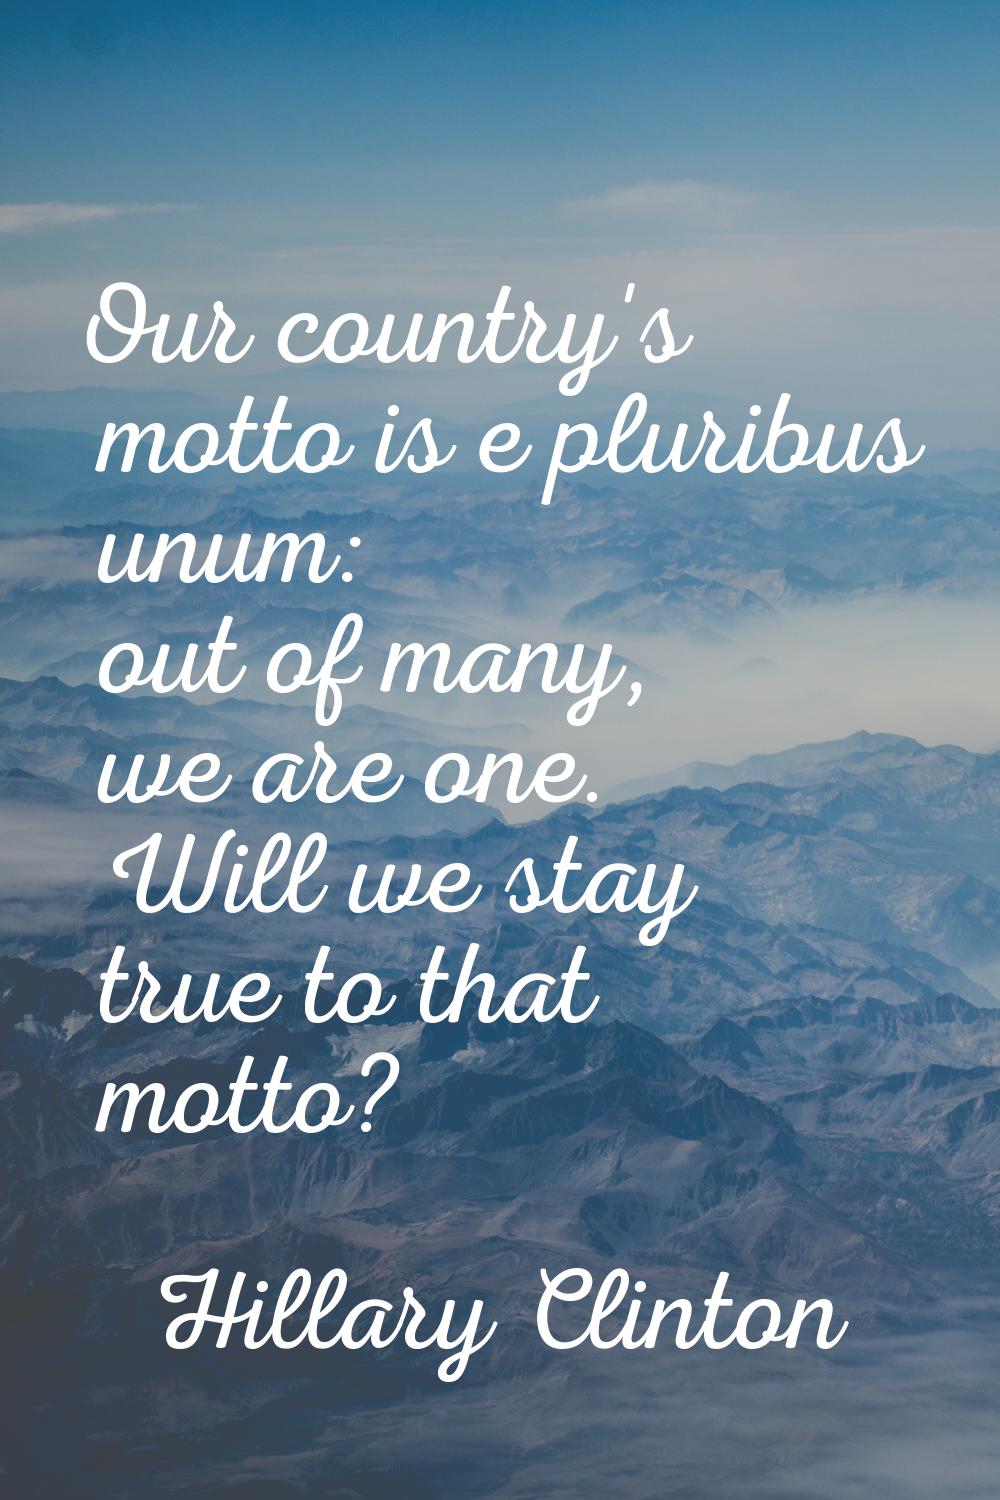 Our country's motto is e pluribus unum: out of many, we are one. Will we stay true to that motto?